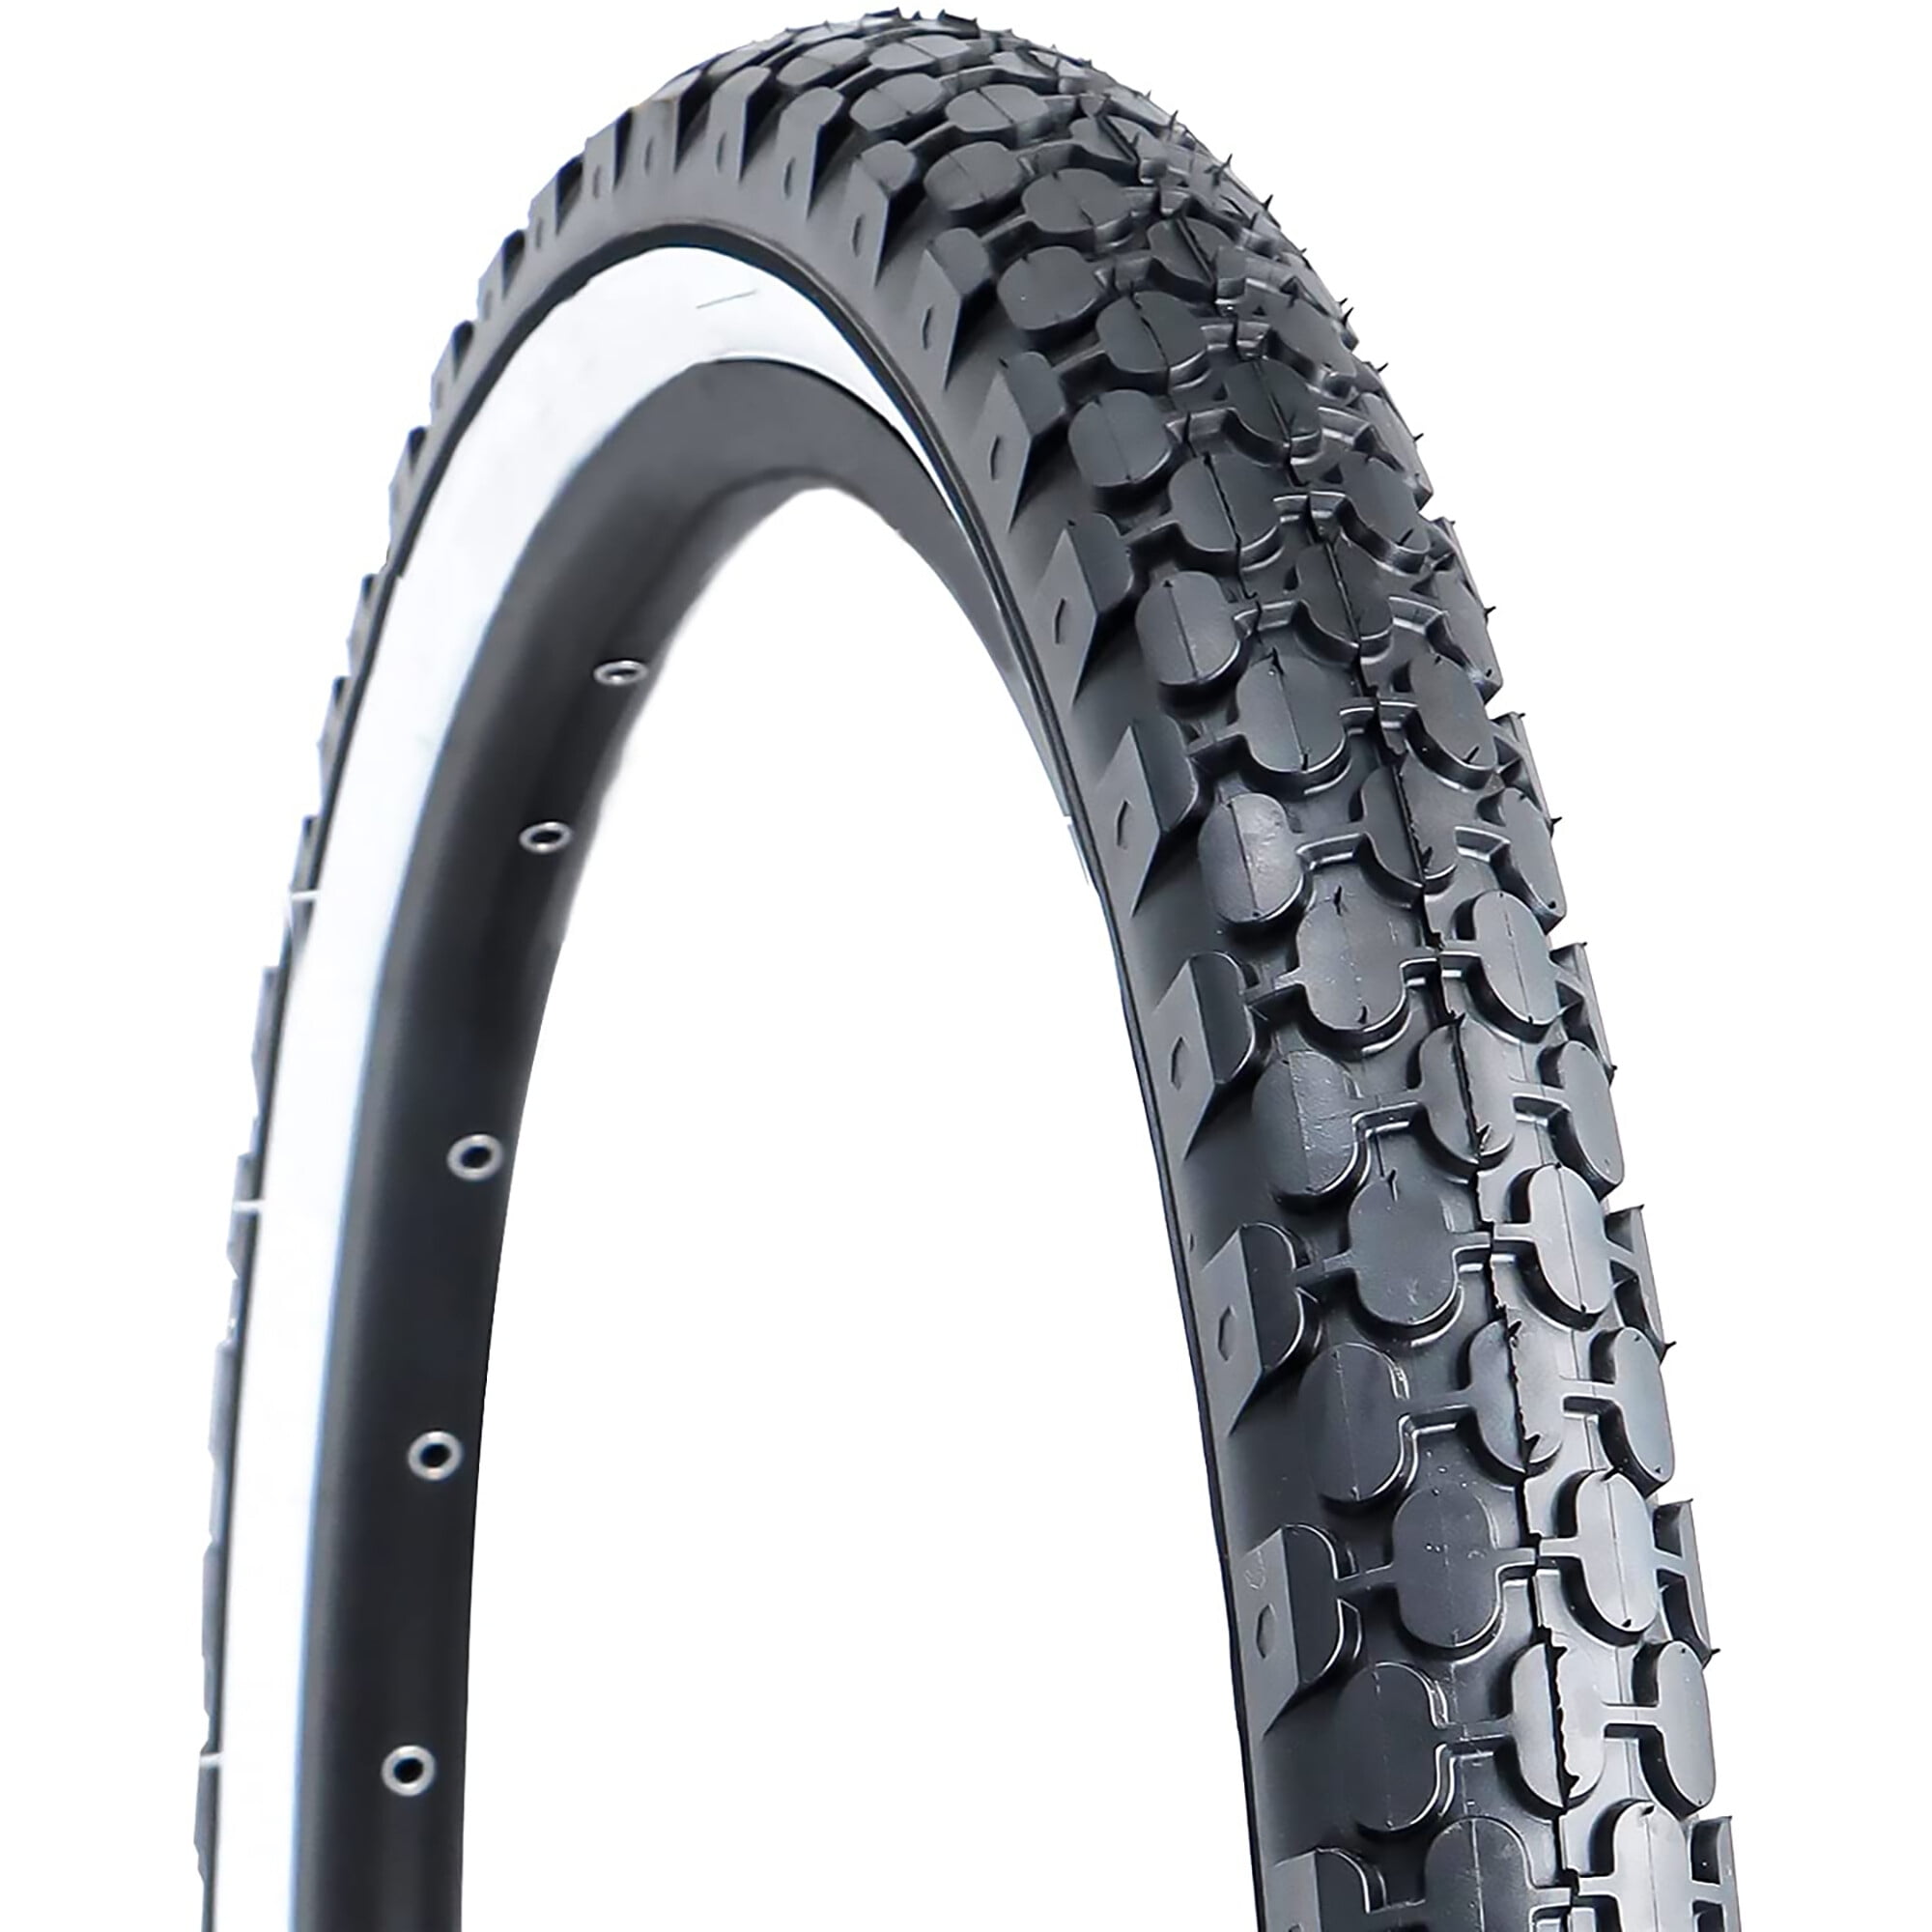 24 x 1.95 With Schrader Tubes Mountain Bike 2 Bicycle Tyres Bike Tires 